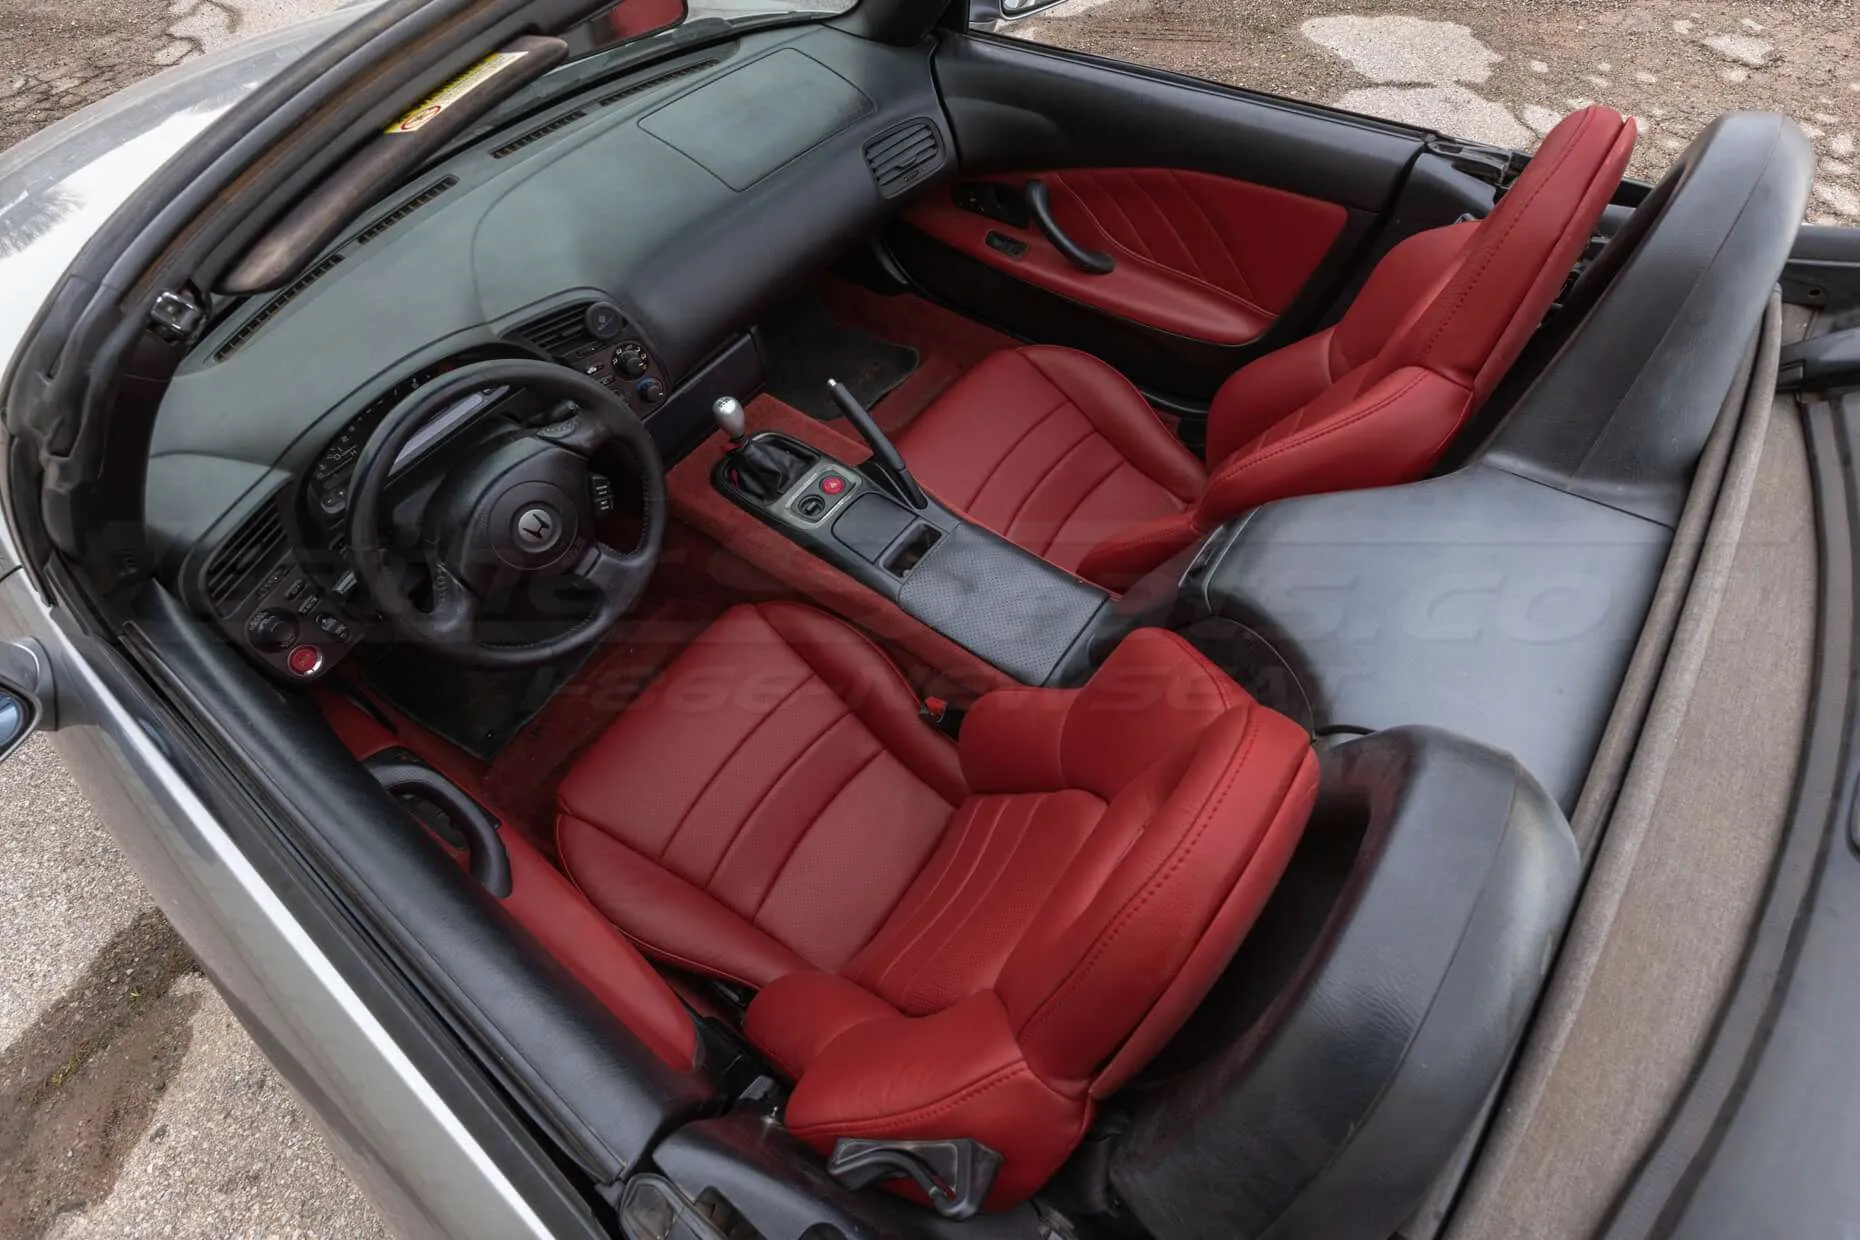 Honda S2000 Installed Leather Seats - Overhead view